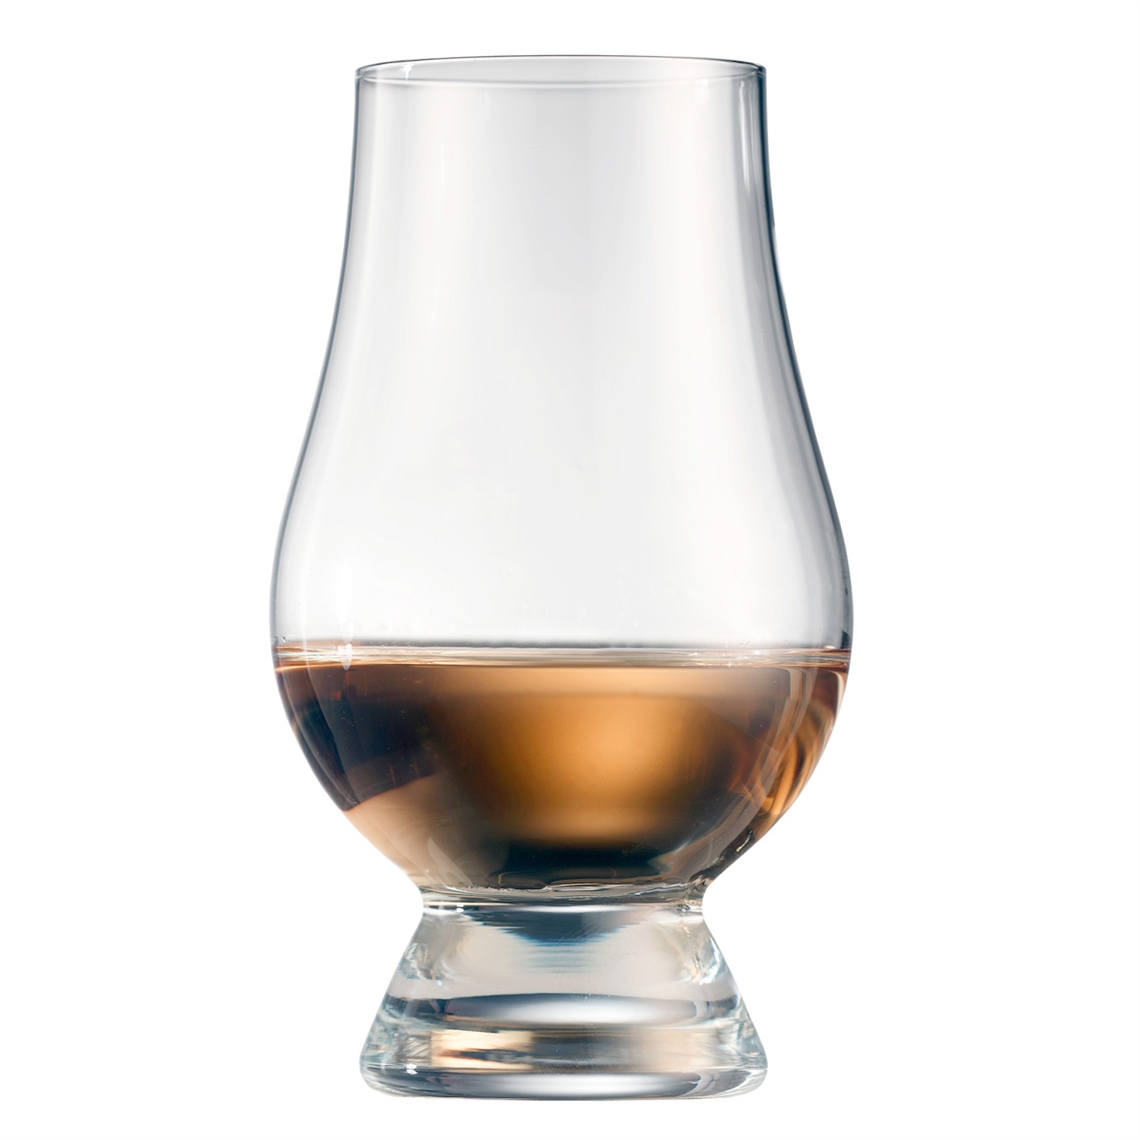 View more pure from our Whisky Glasses range